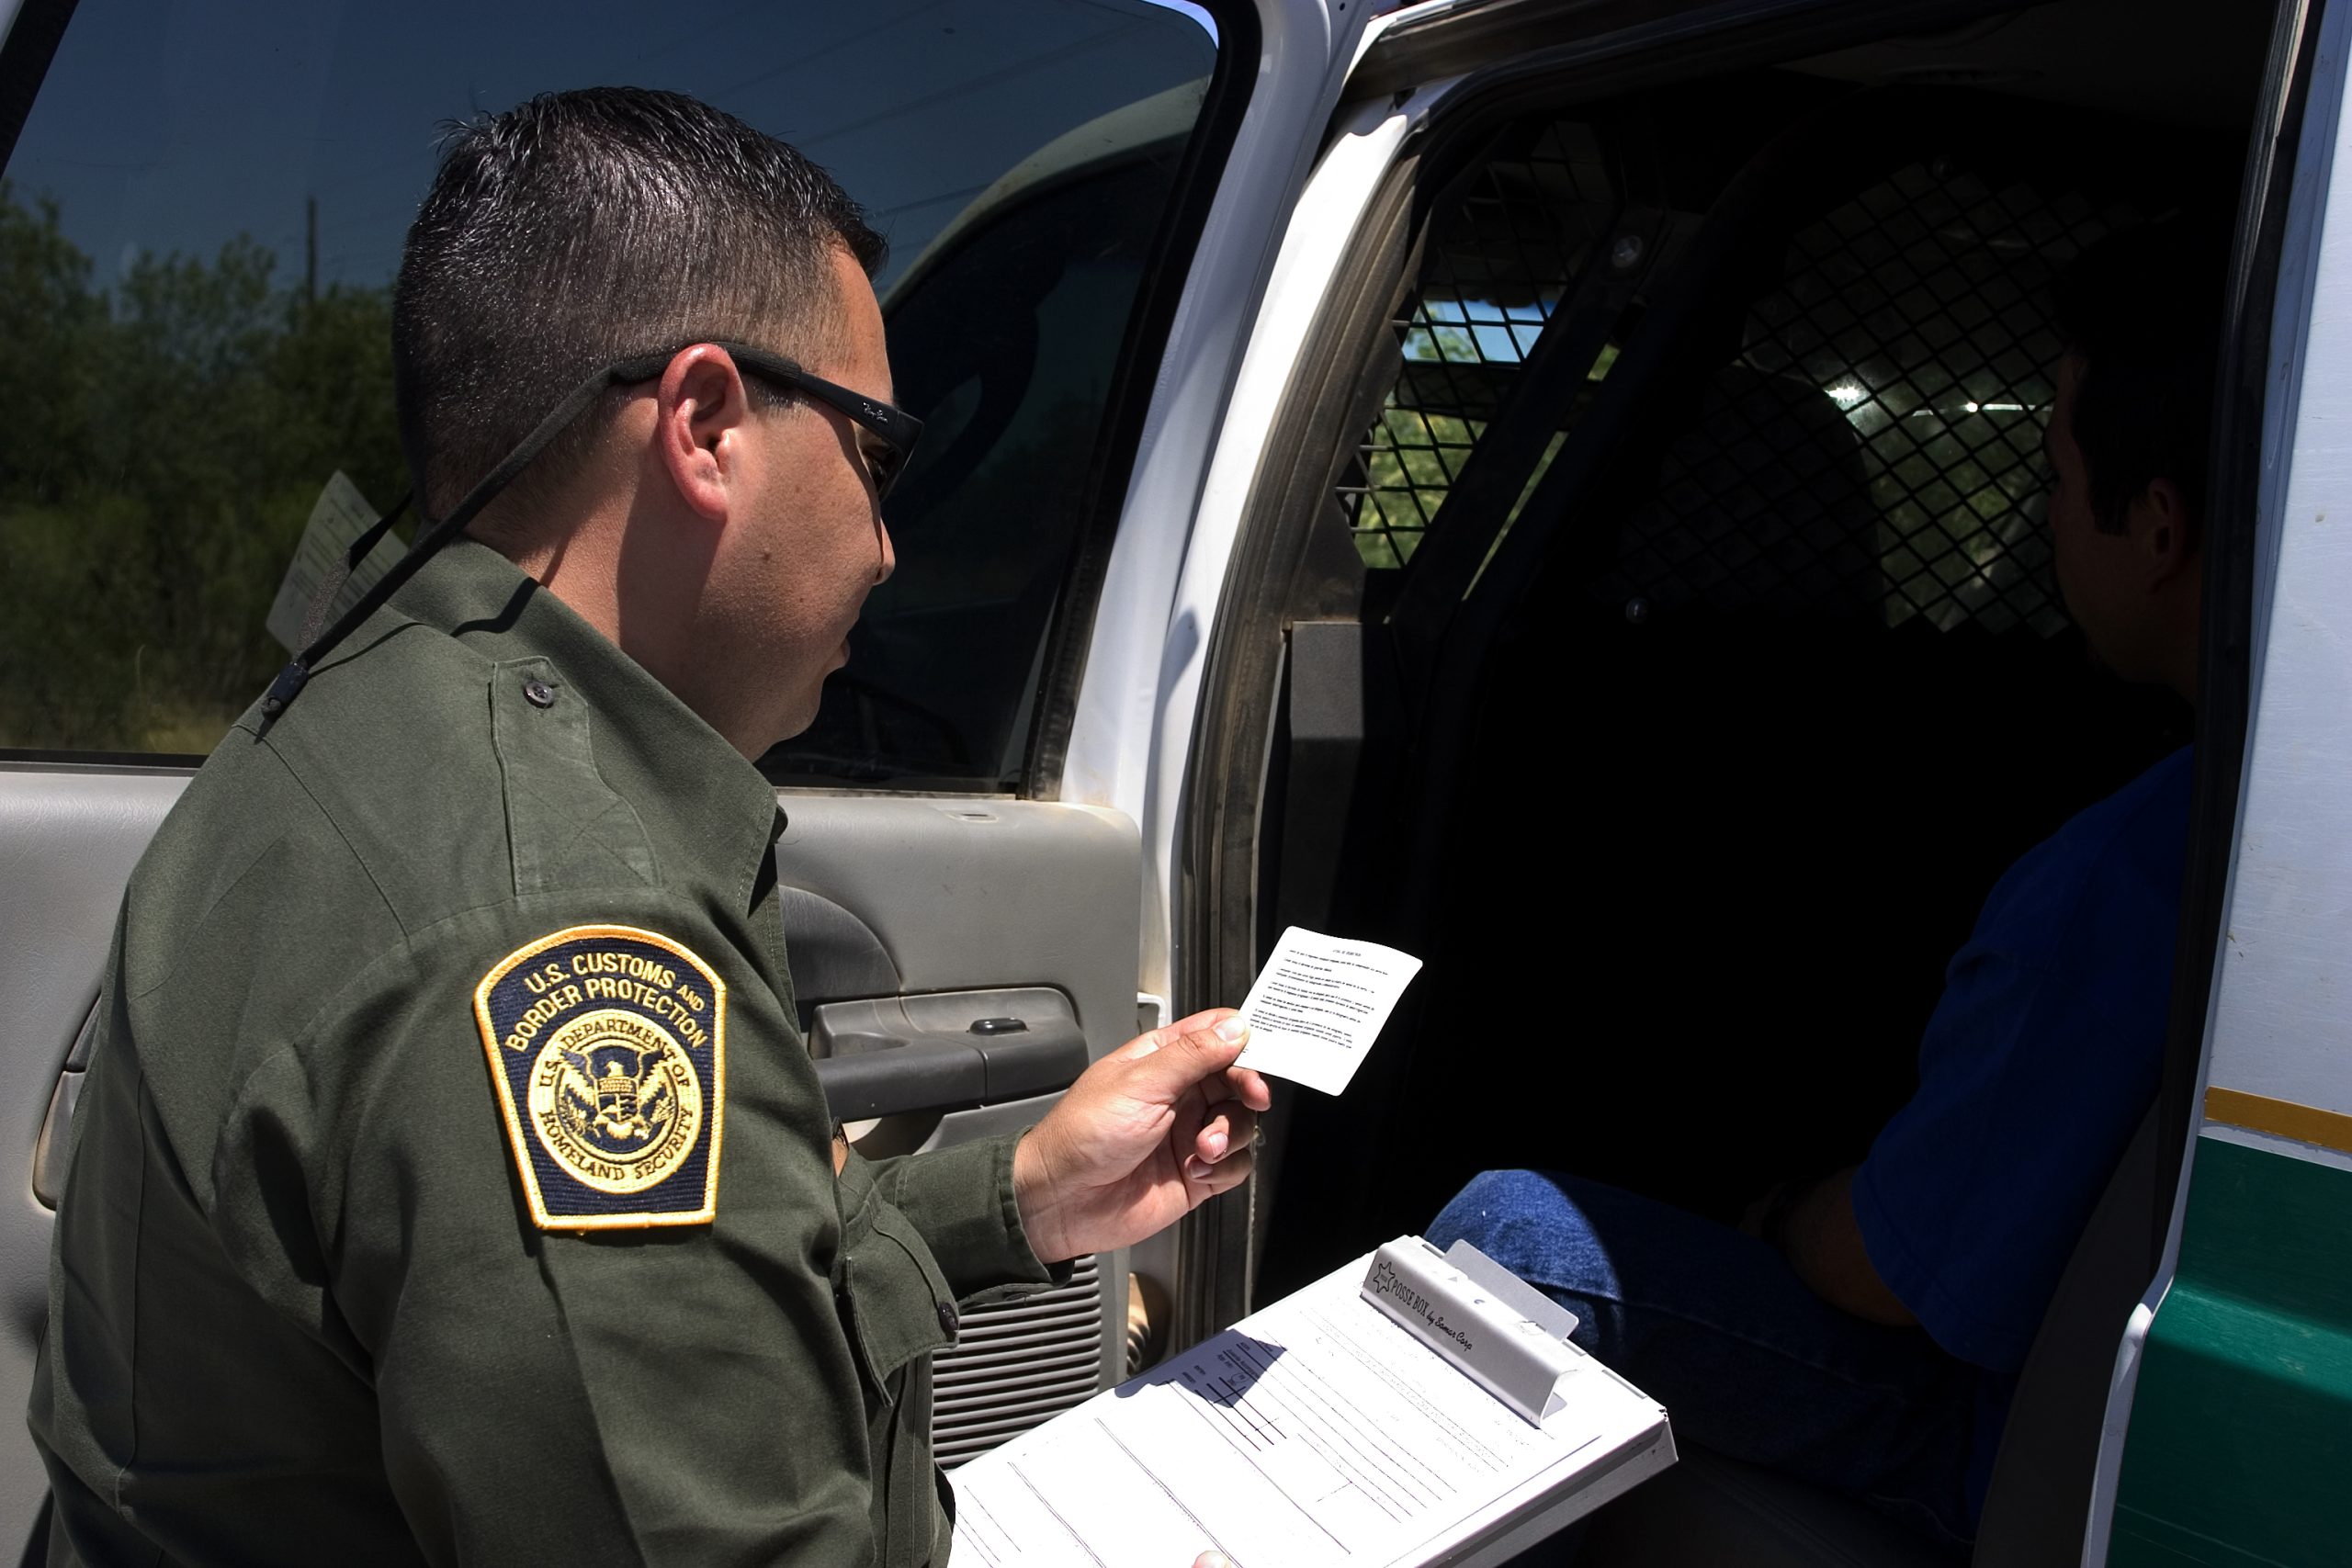 Border Patrol apprehensions dipped last month, but 2019 saw a dramatic increase from 2018